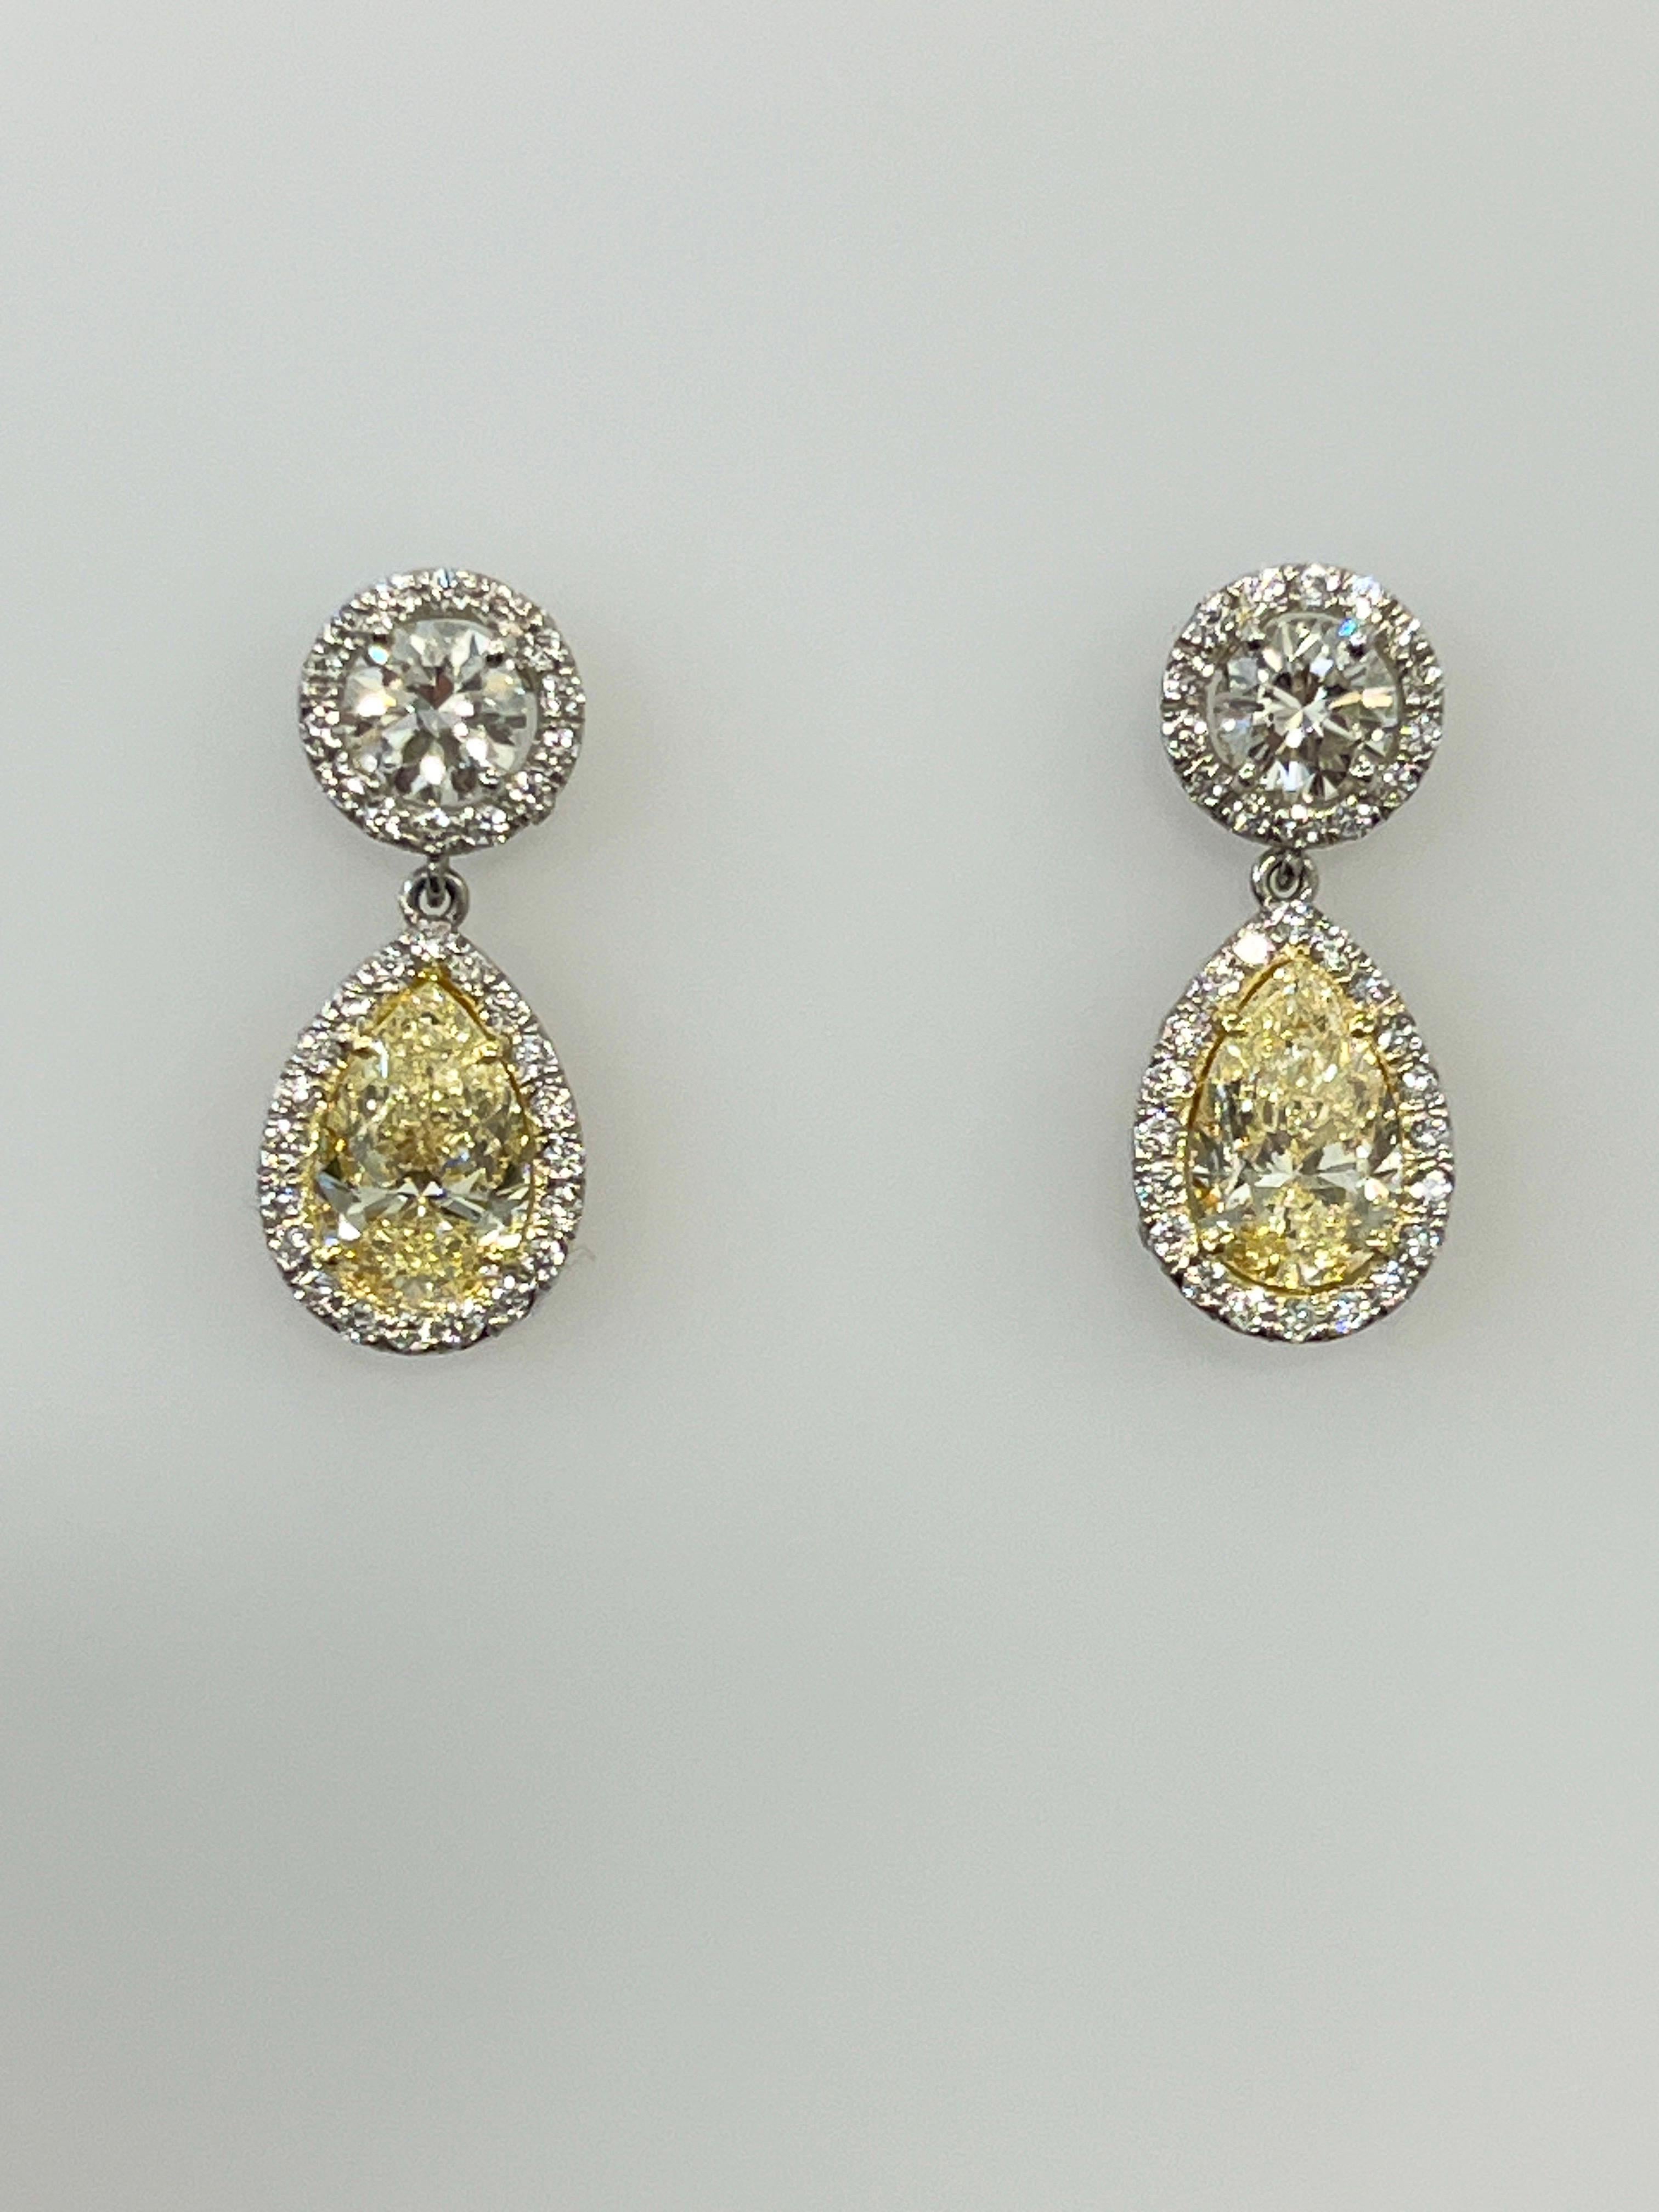 These stunning 4.93 ct natural yellow and diamond dangle earrings are sure to make heads turn. With a VS1 in clarity, the surrounding diamonds around the stone are a G/H in color and VS2/SI1 in clarity. They are a must have for any wardrobe.